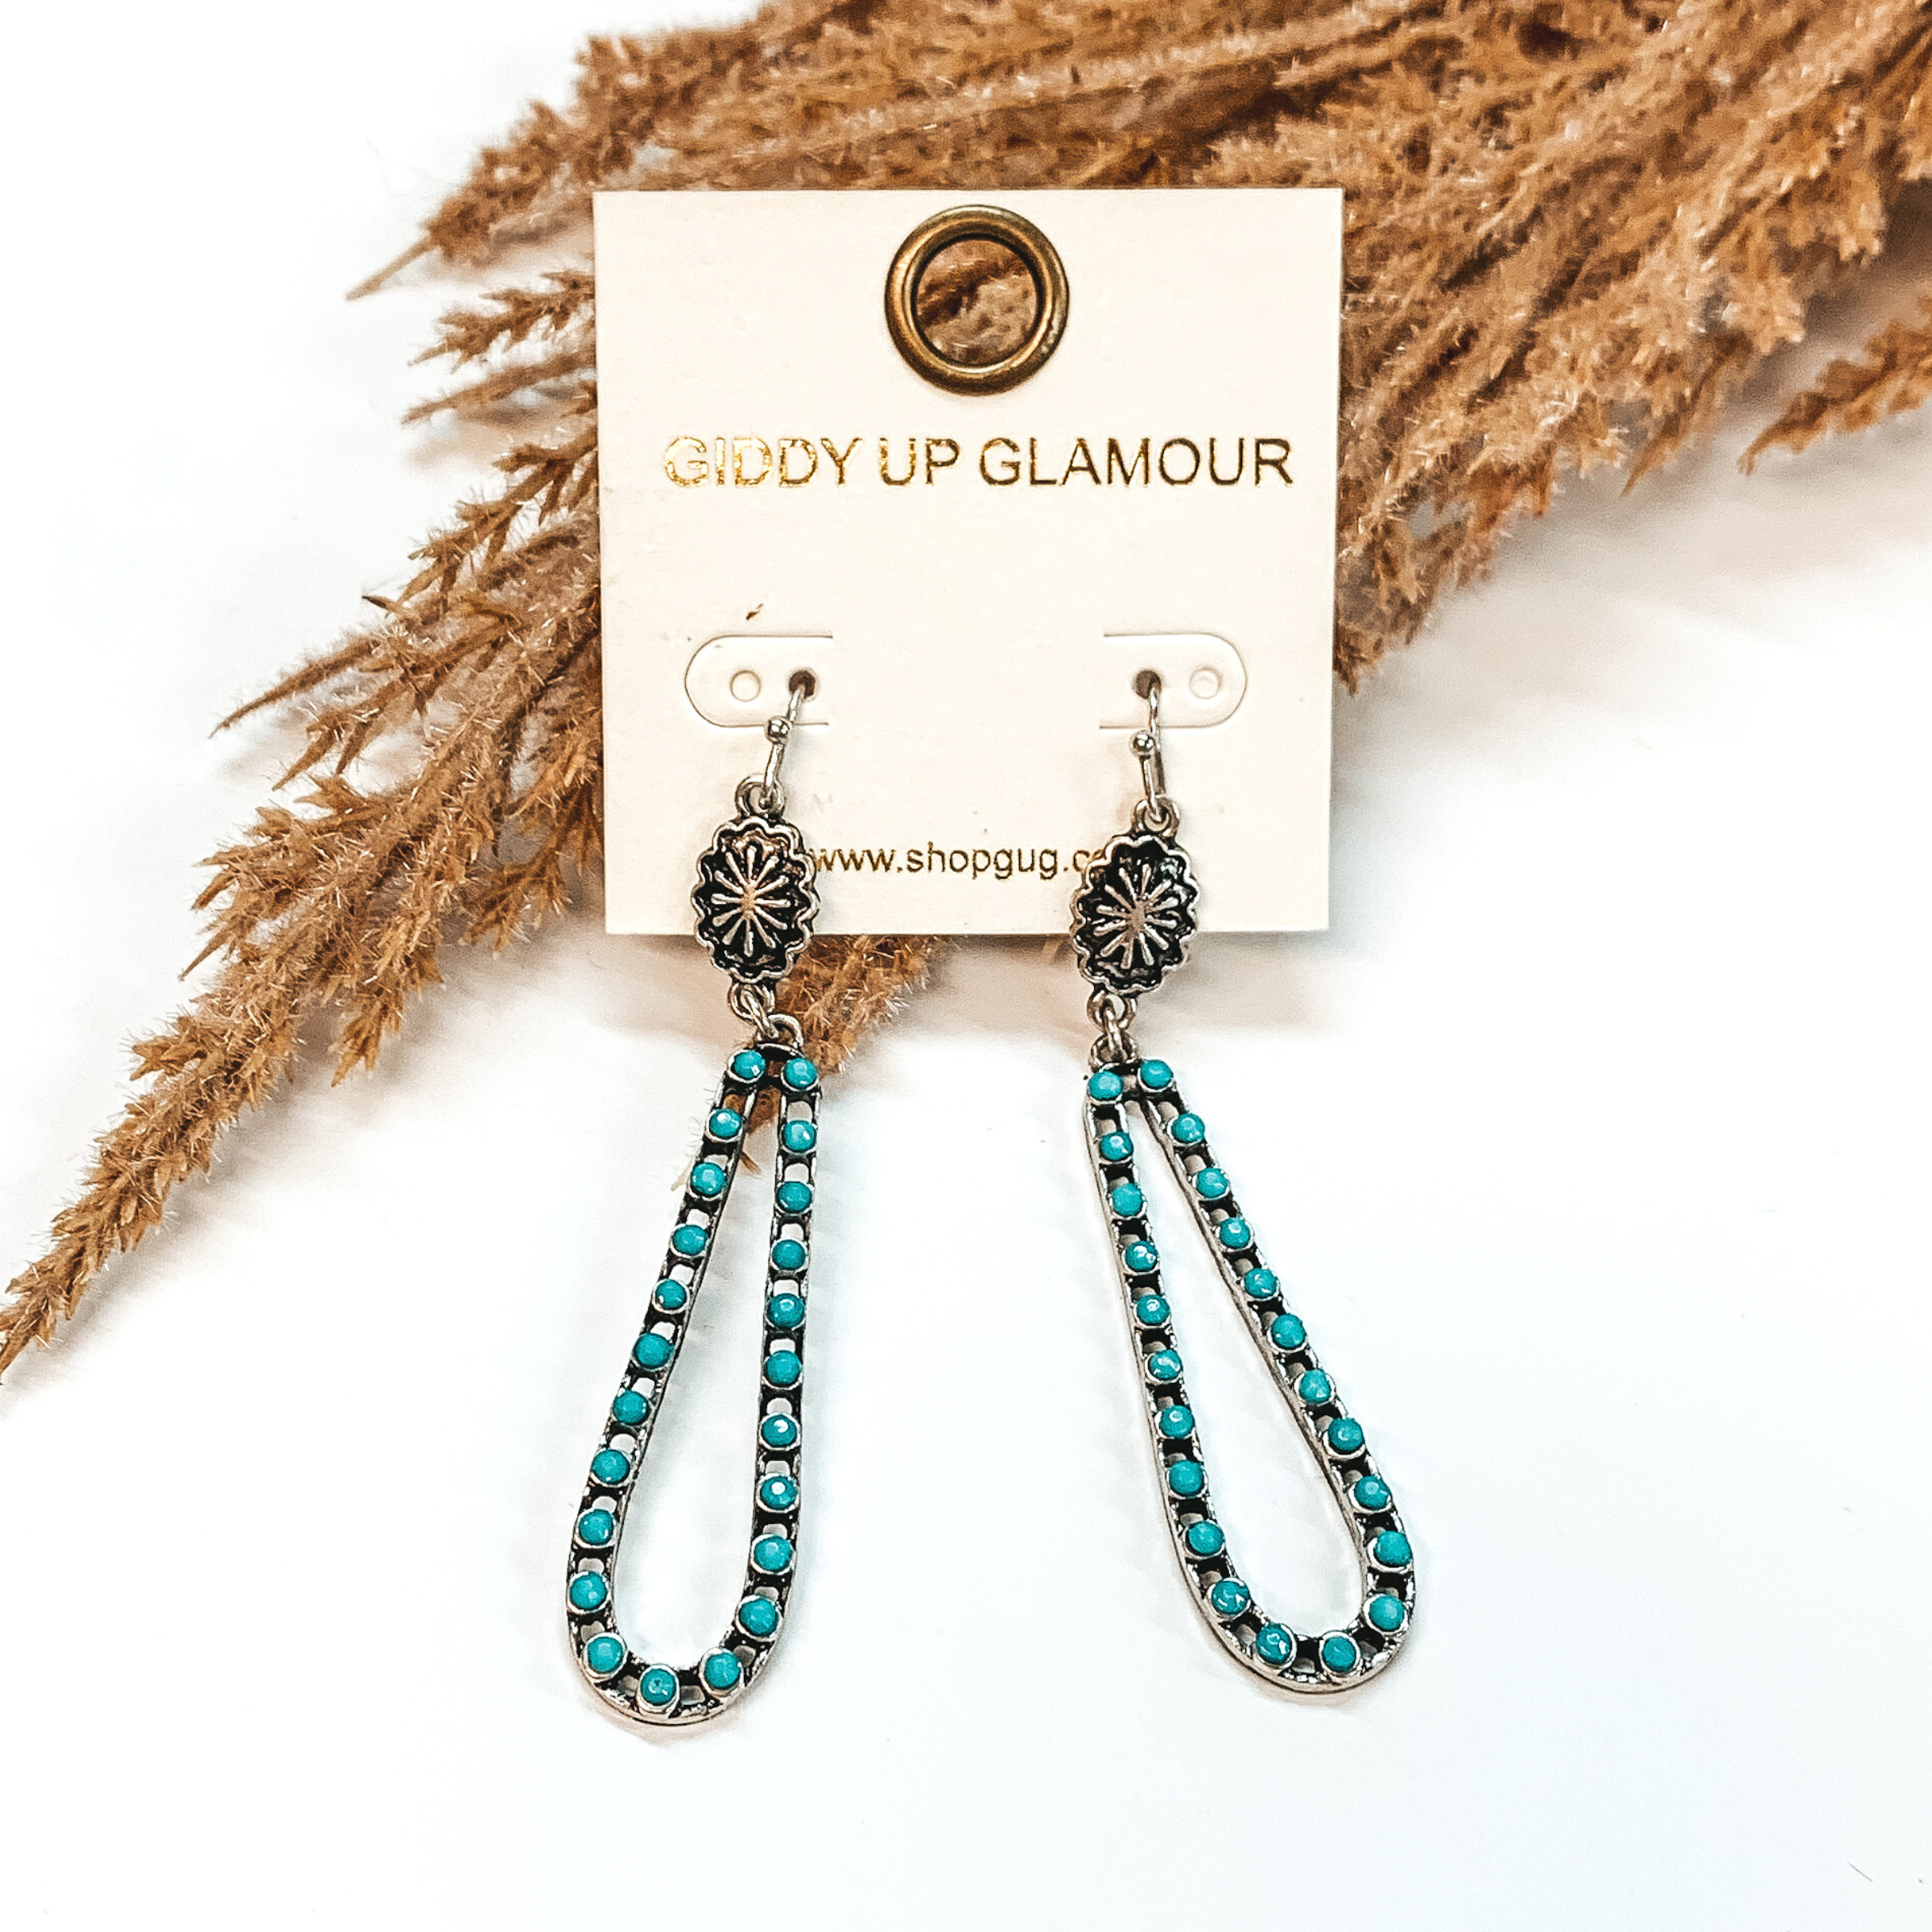 Western Long Dangle Earrings in Turquoise - Giddy Up Glamour Boutique